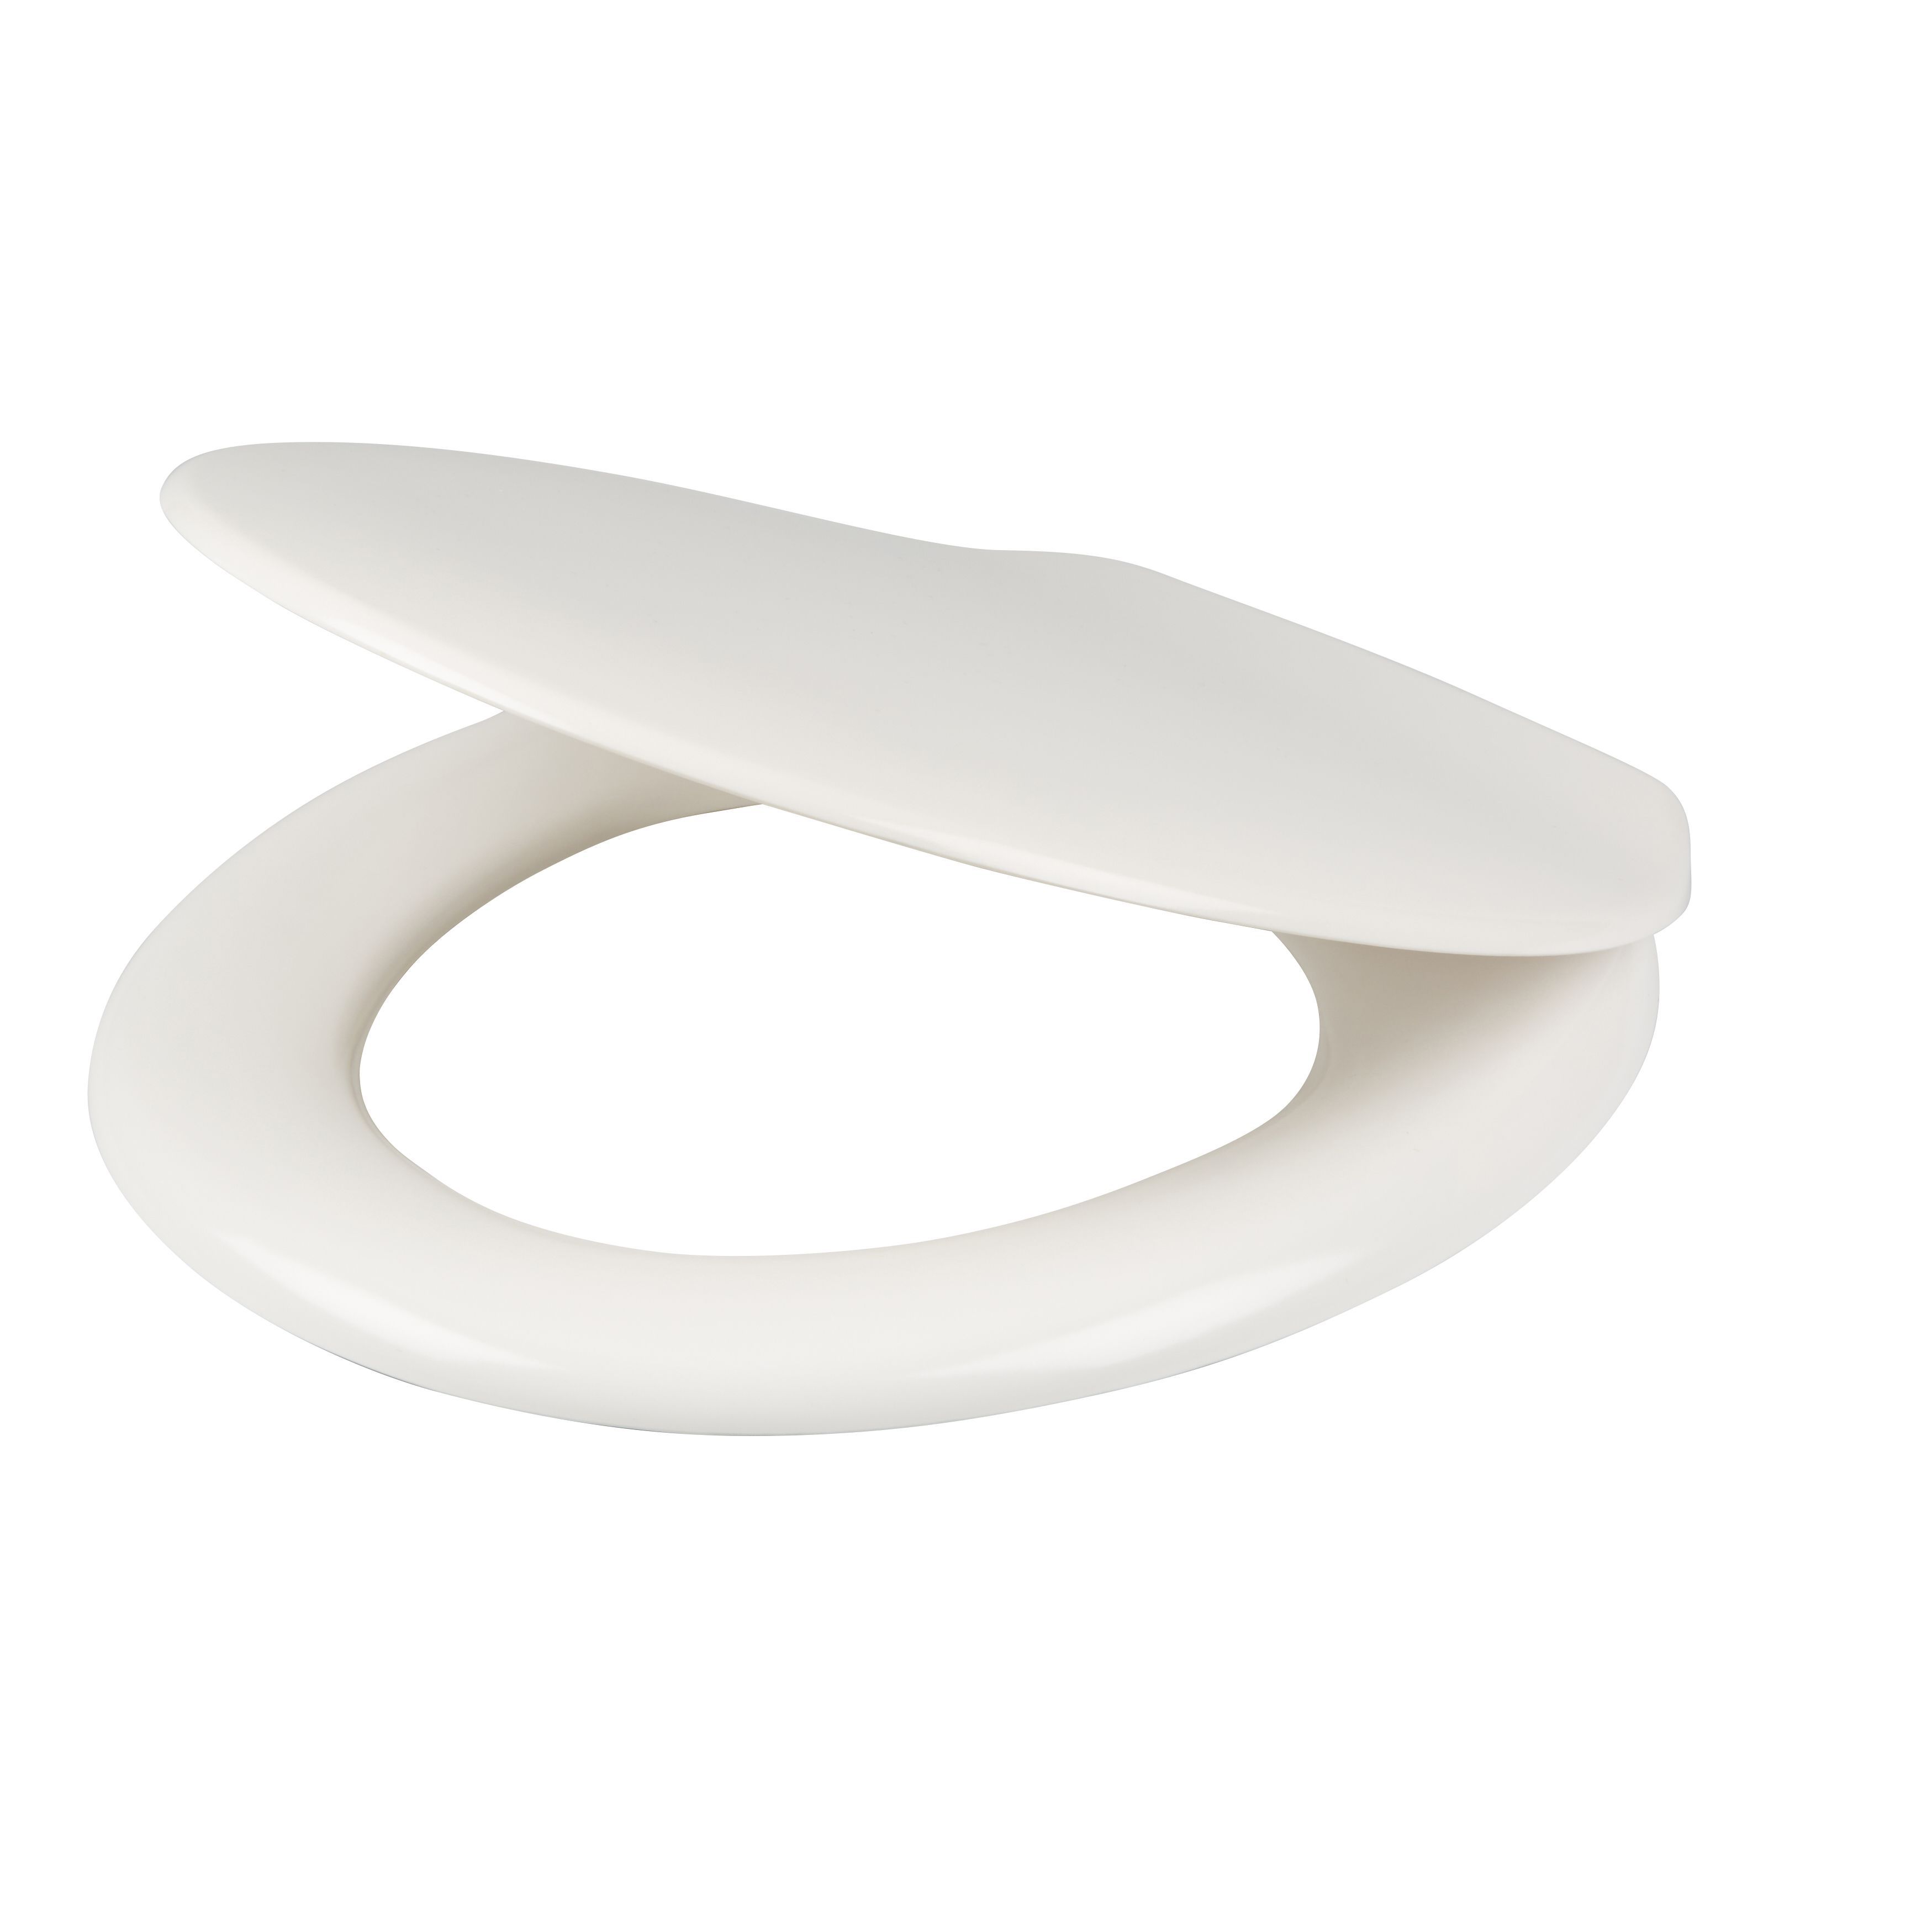 Cooke & Lewis Genoa White Soft close Toilet seat | Departments | TradePoint